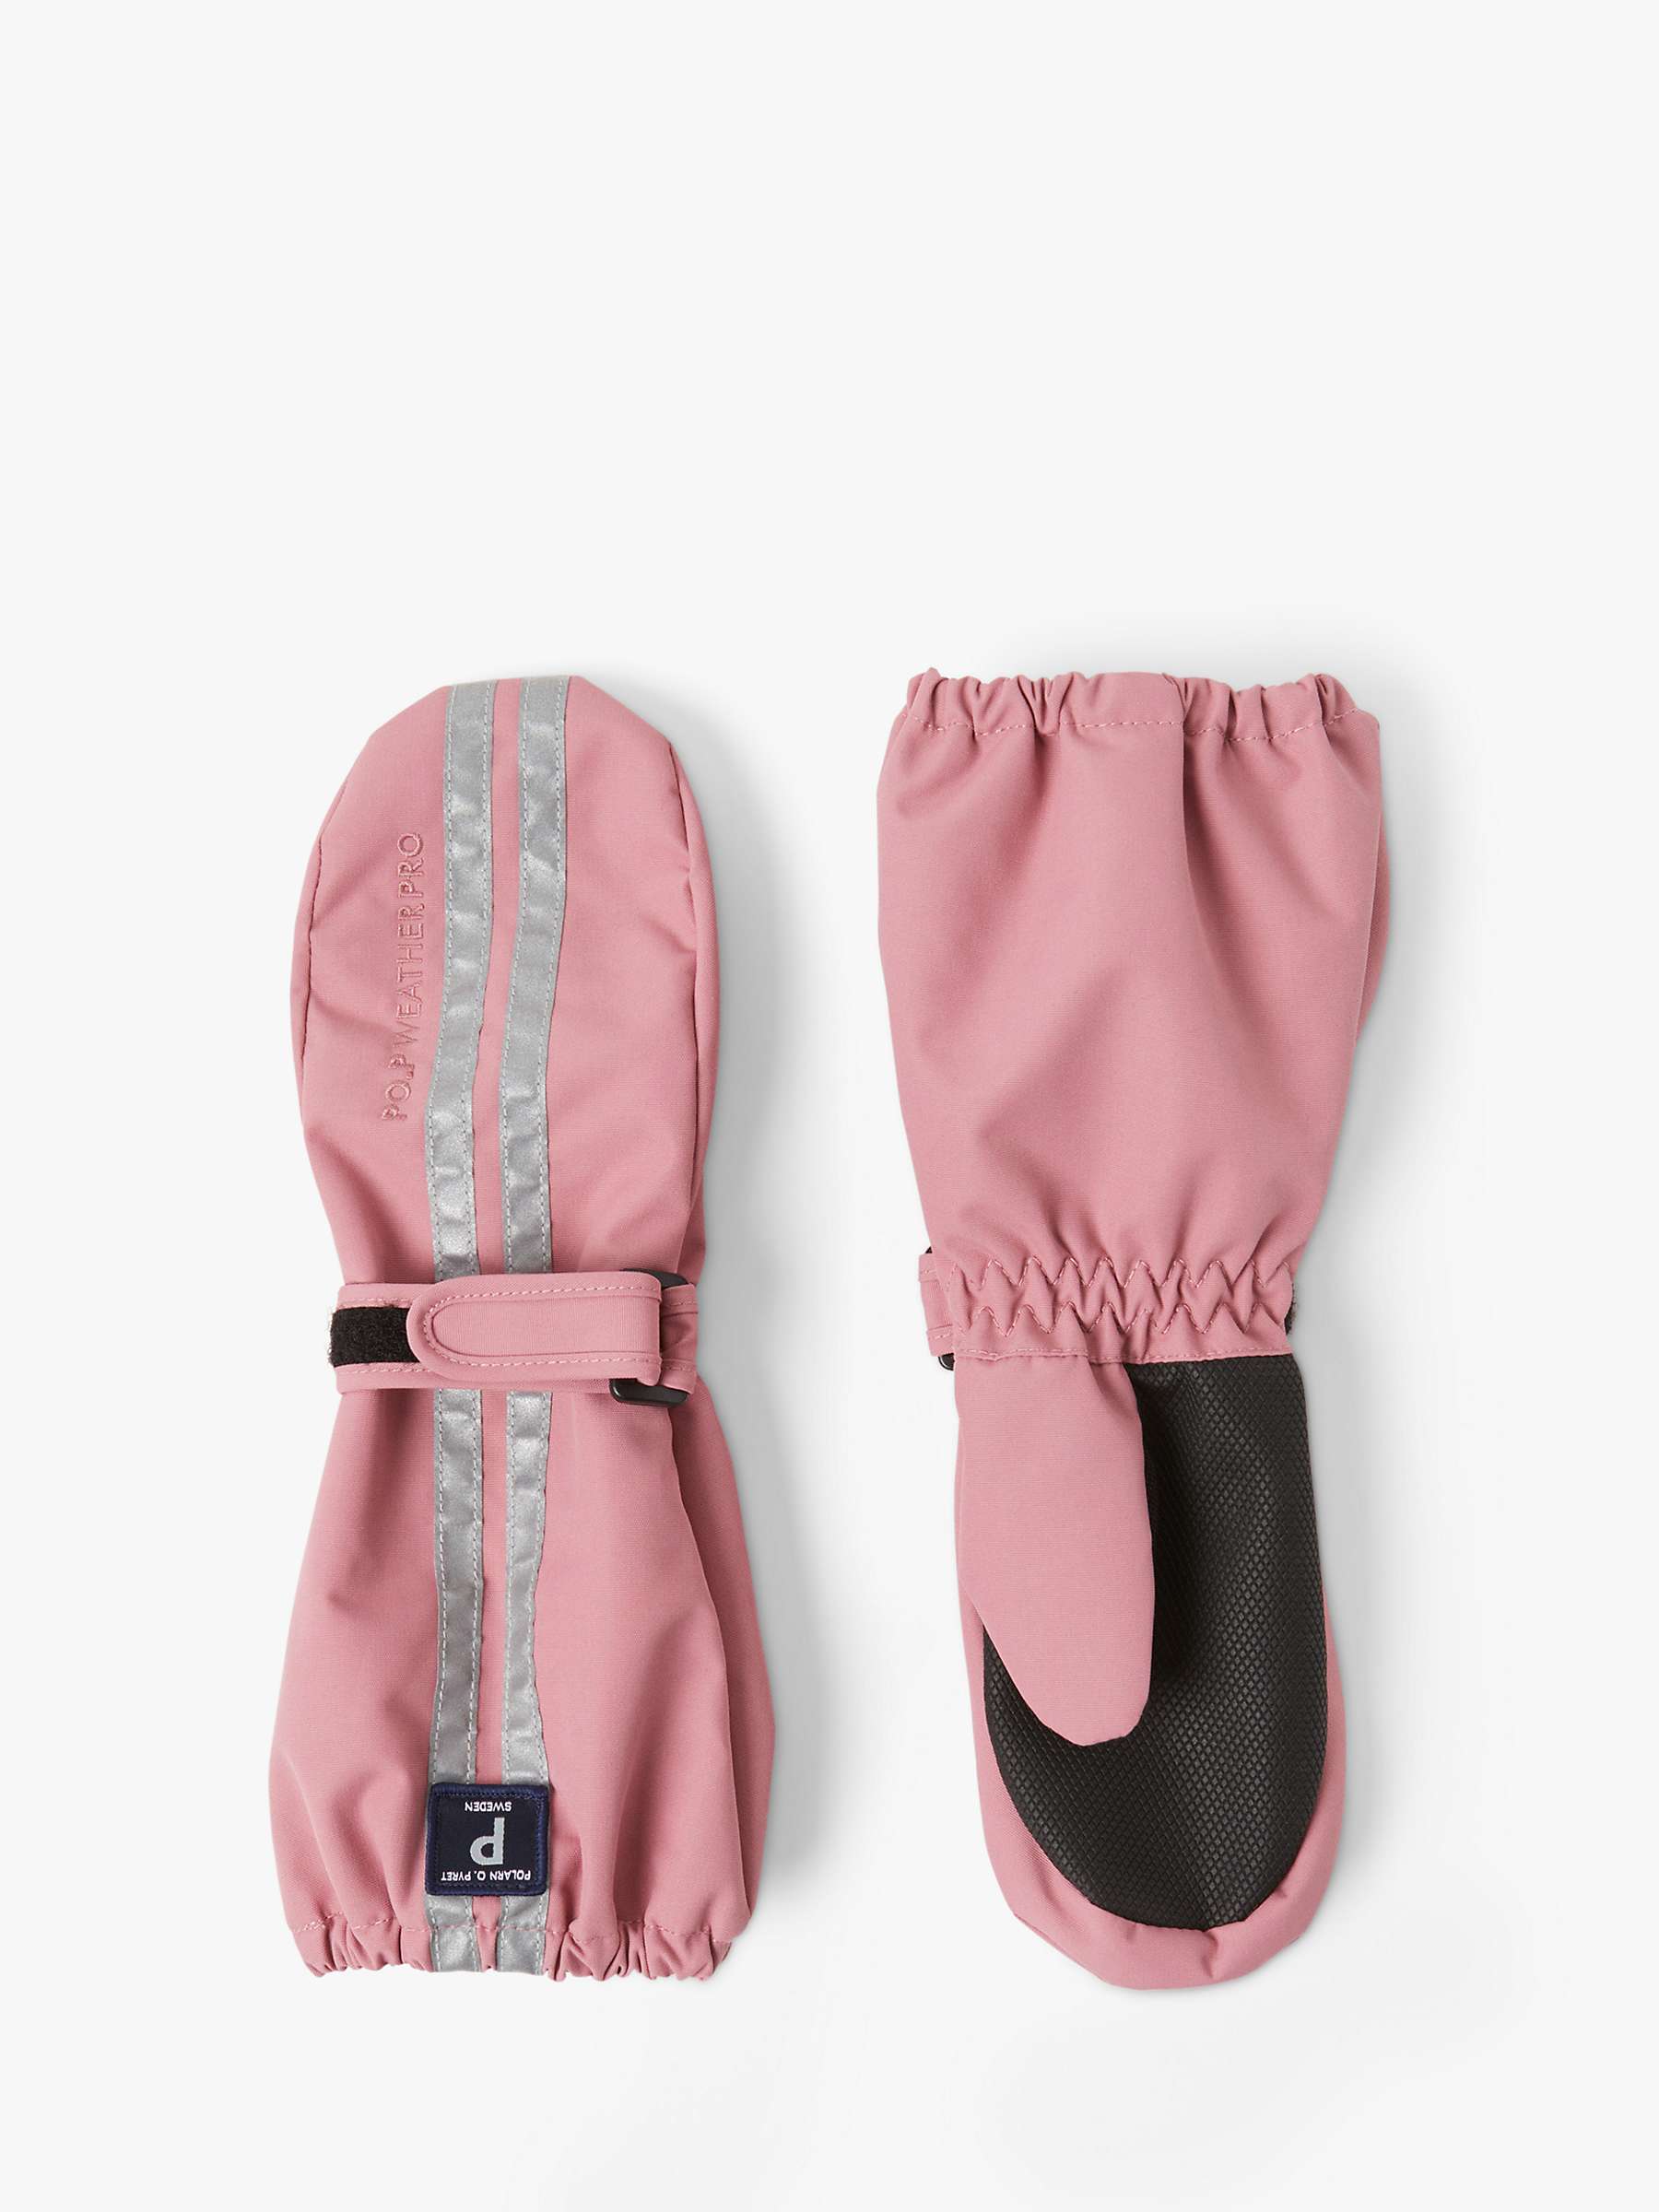 Buy Polarn O. Pyret Baby Windproof & Waterproof Shell Mittens, Pink Online at johnlewis.com